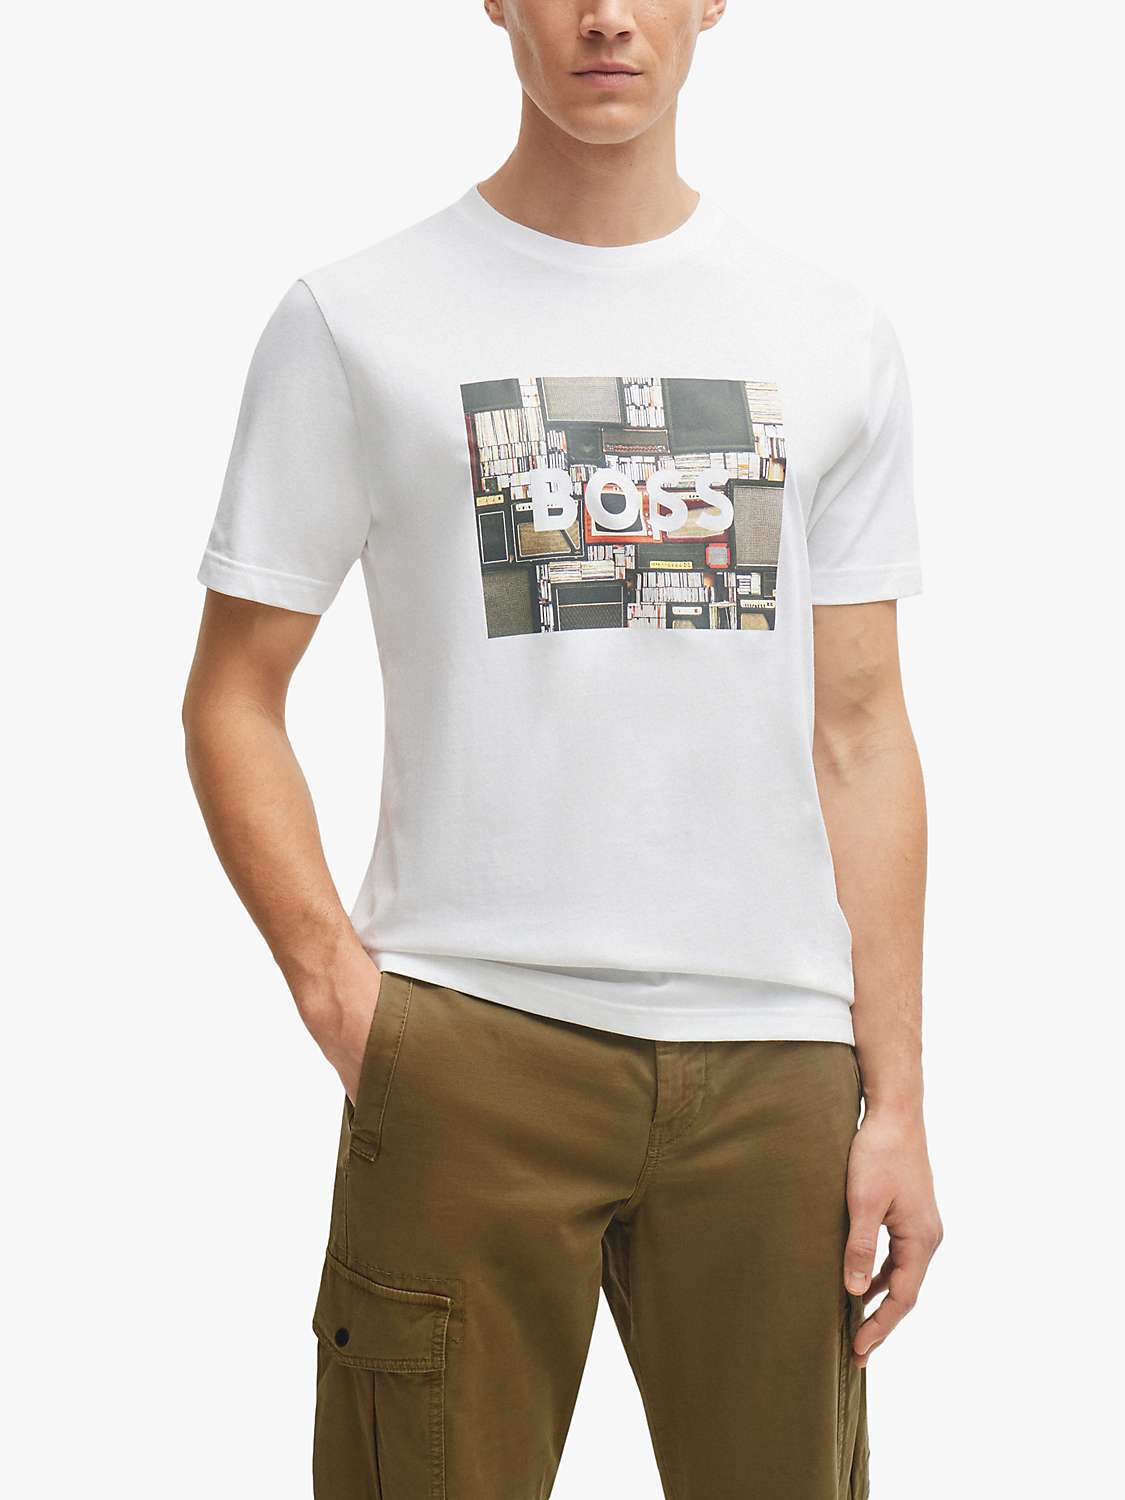 Buy BOSS Collection Theme T-Shirt, White/Multi Online at johnlewis.com